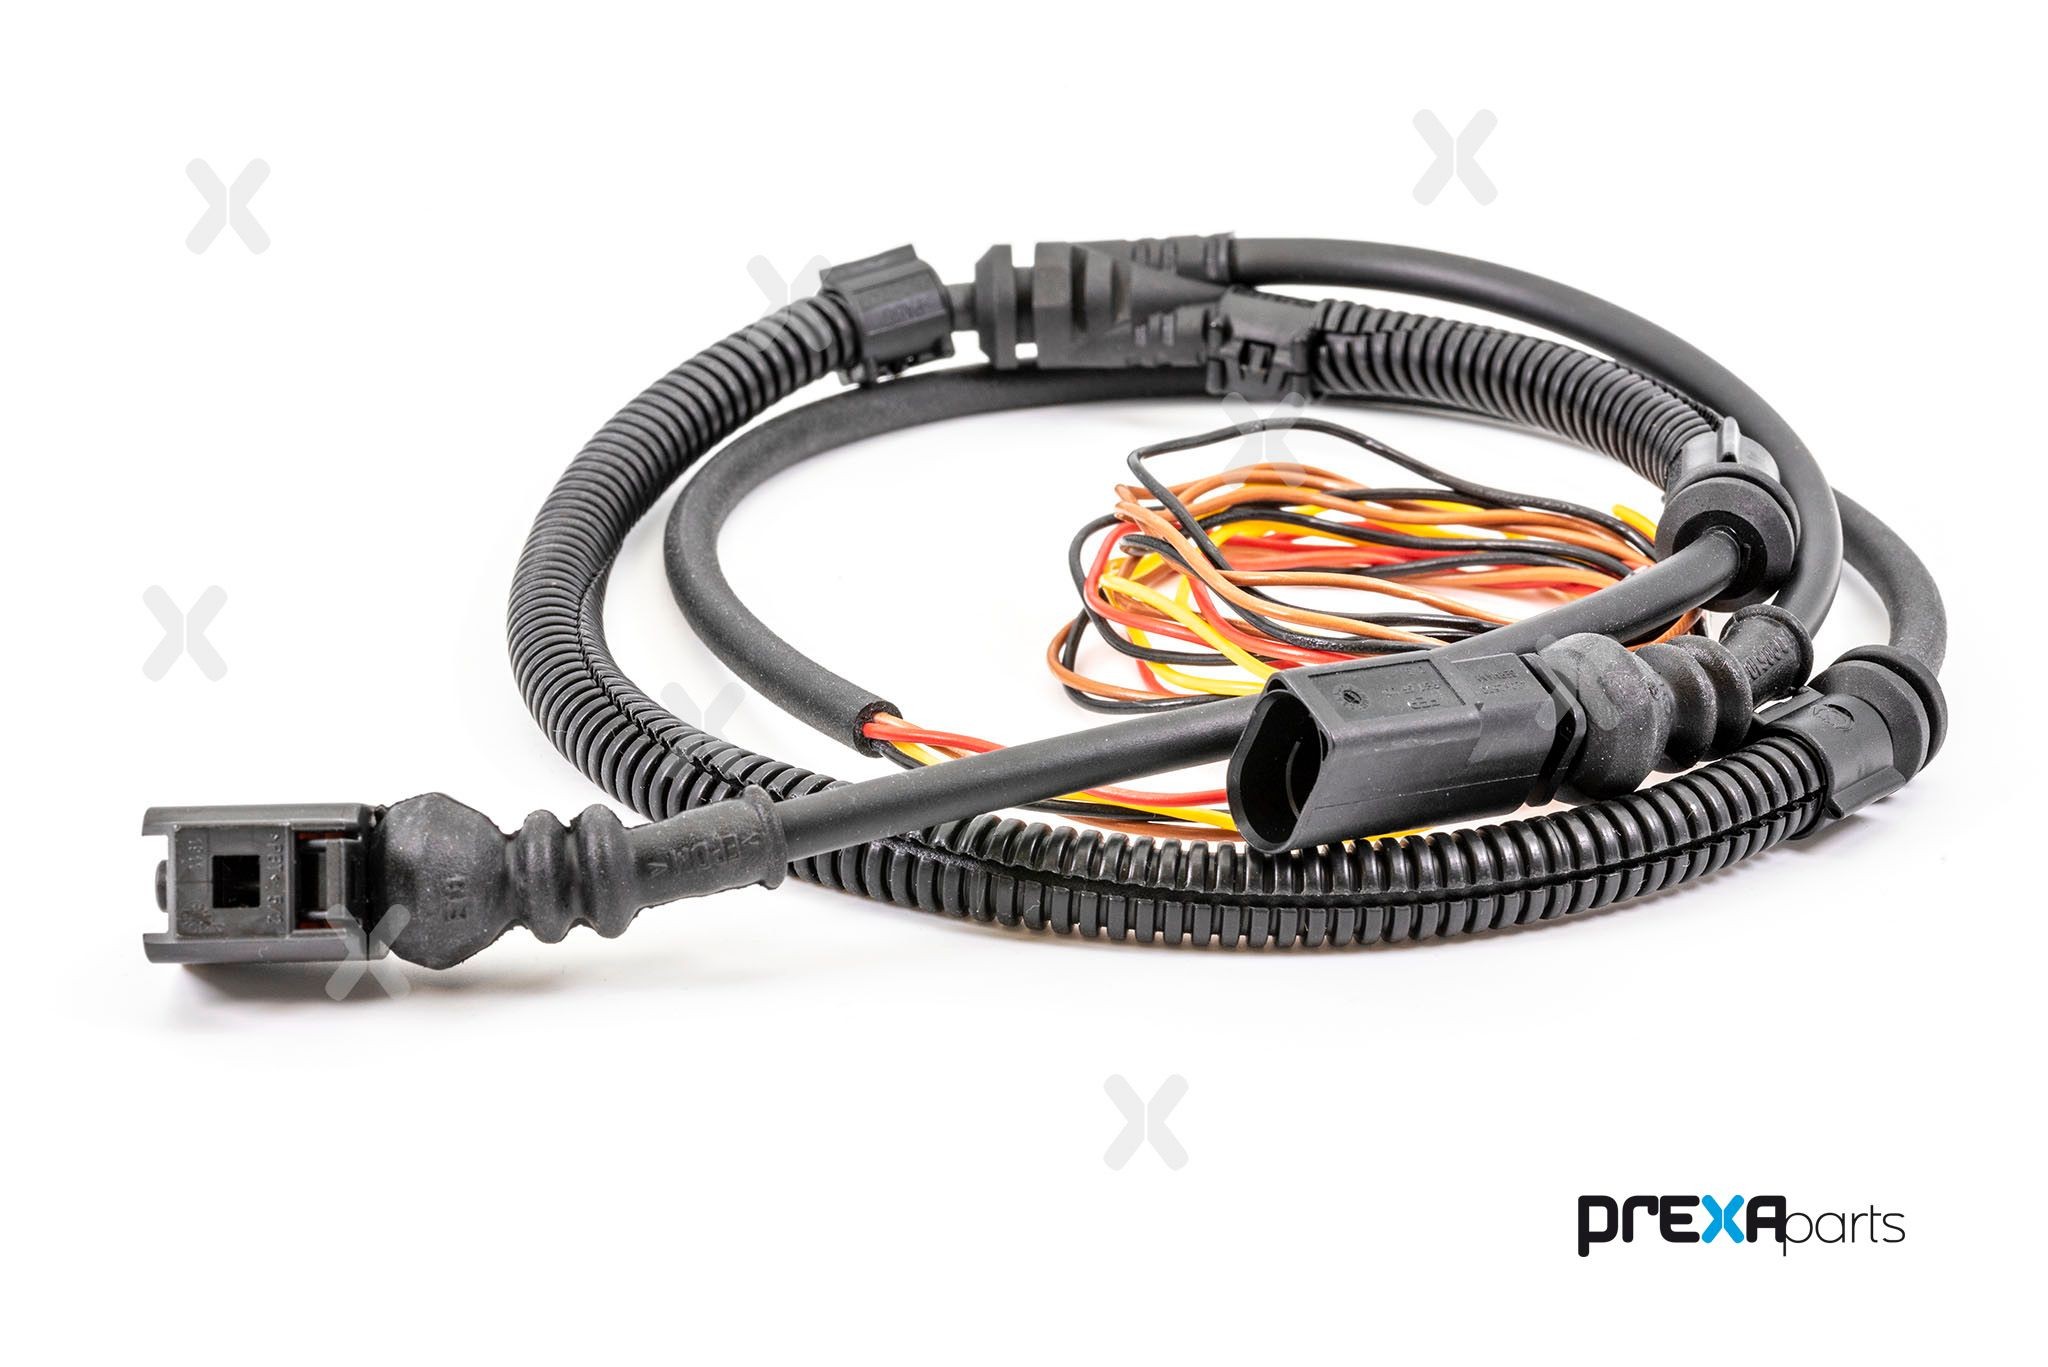 Original P143009 PREXAparts Tyre pressure monitoring system (TPMS) experience and price